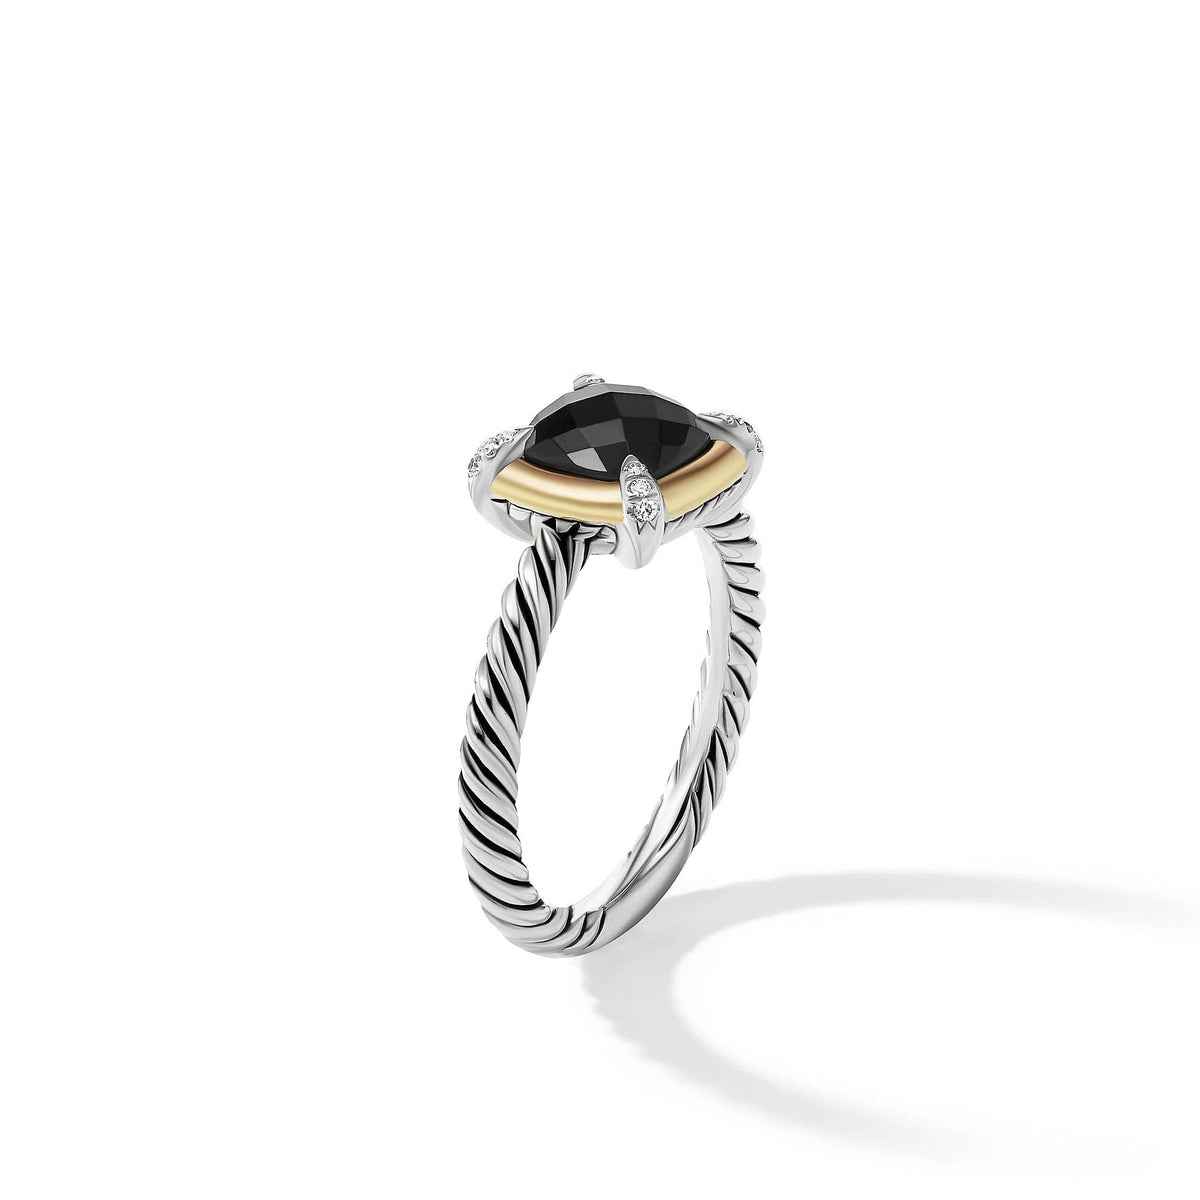 Petite Chatelaine® Ring with Black Onyx, 18K Yellow Gold Bezel and Pavé Diamonds